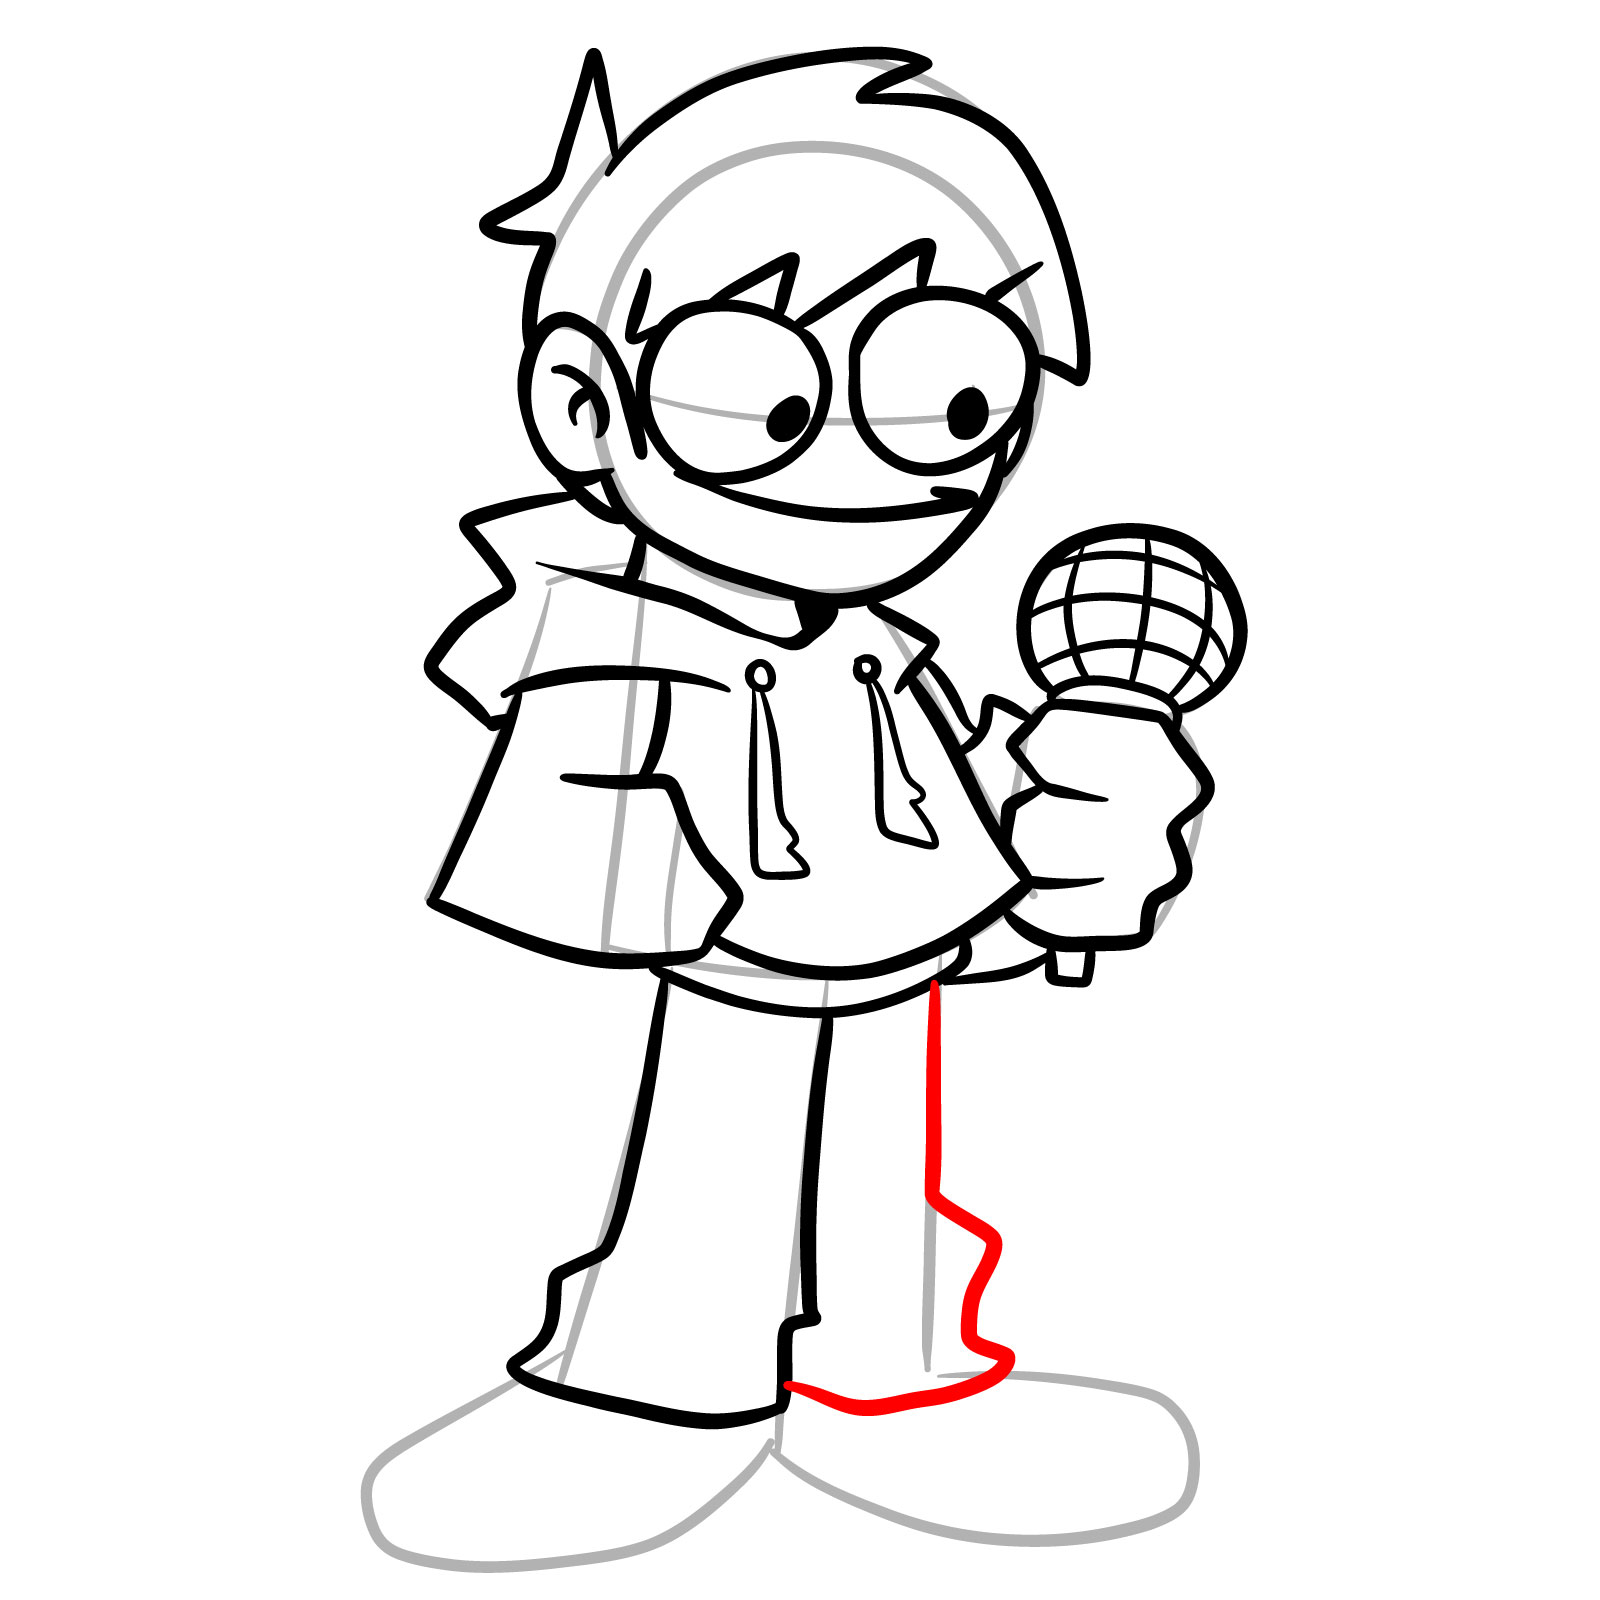 How to draw Edd from Online Vs - step 23